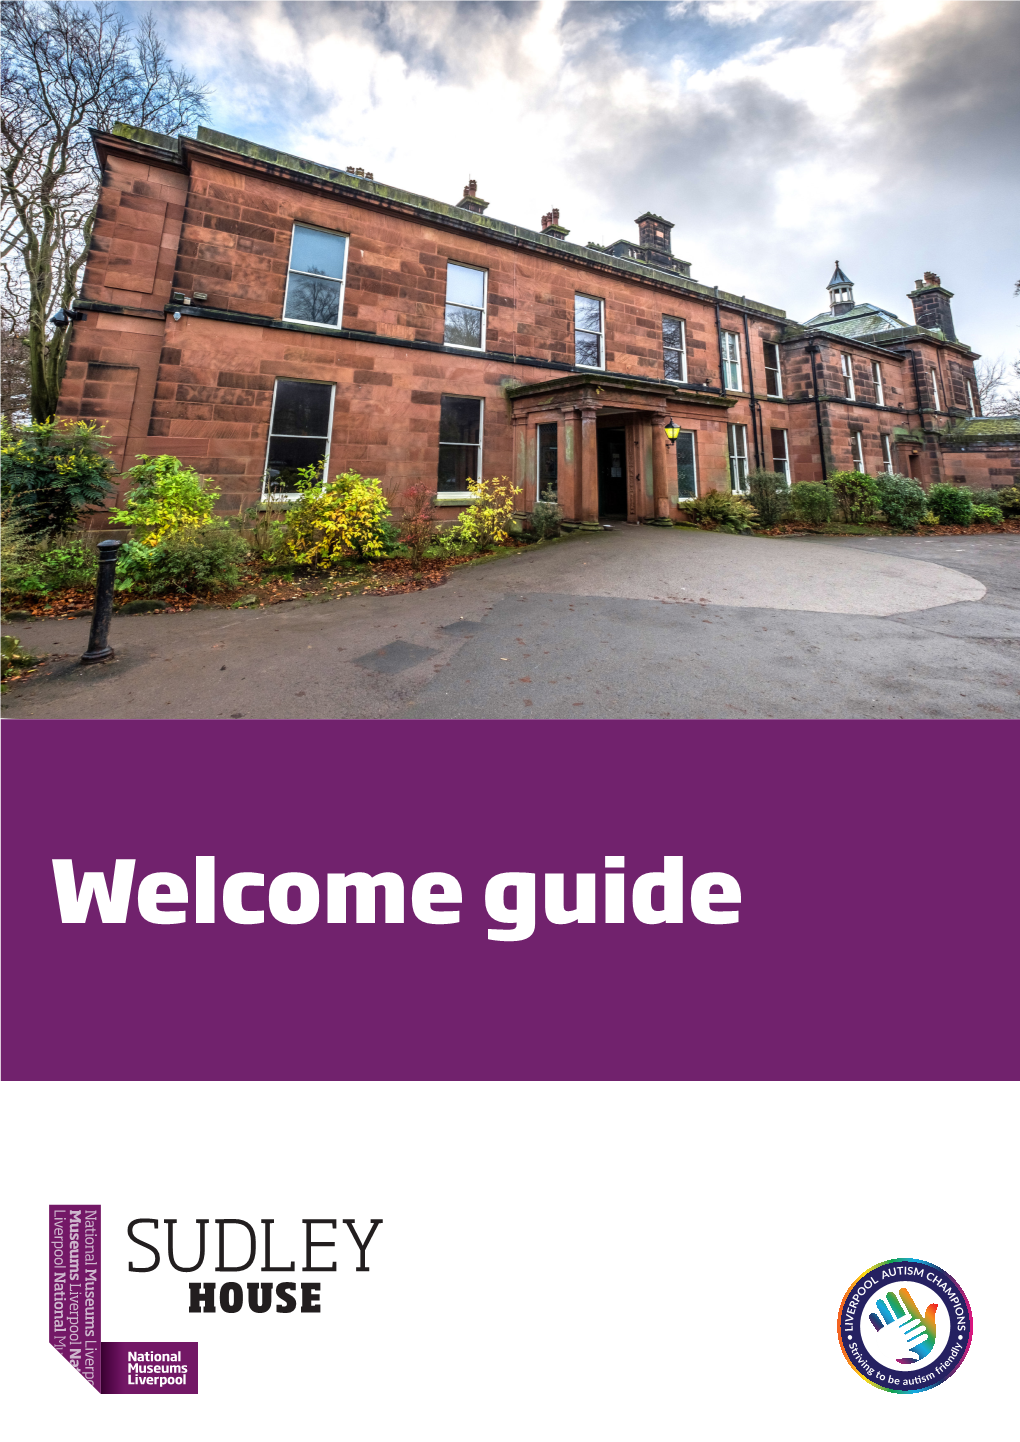 Welcome Guide to Sudley House